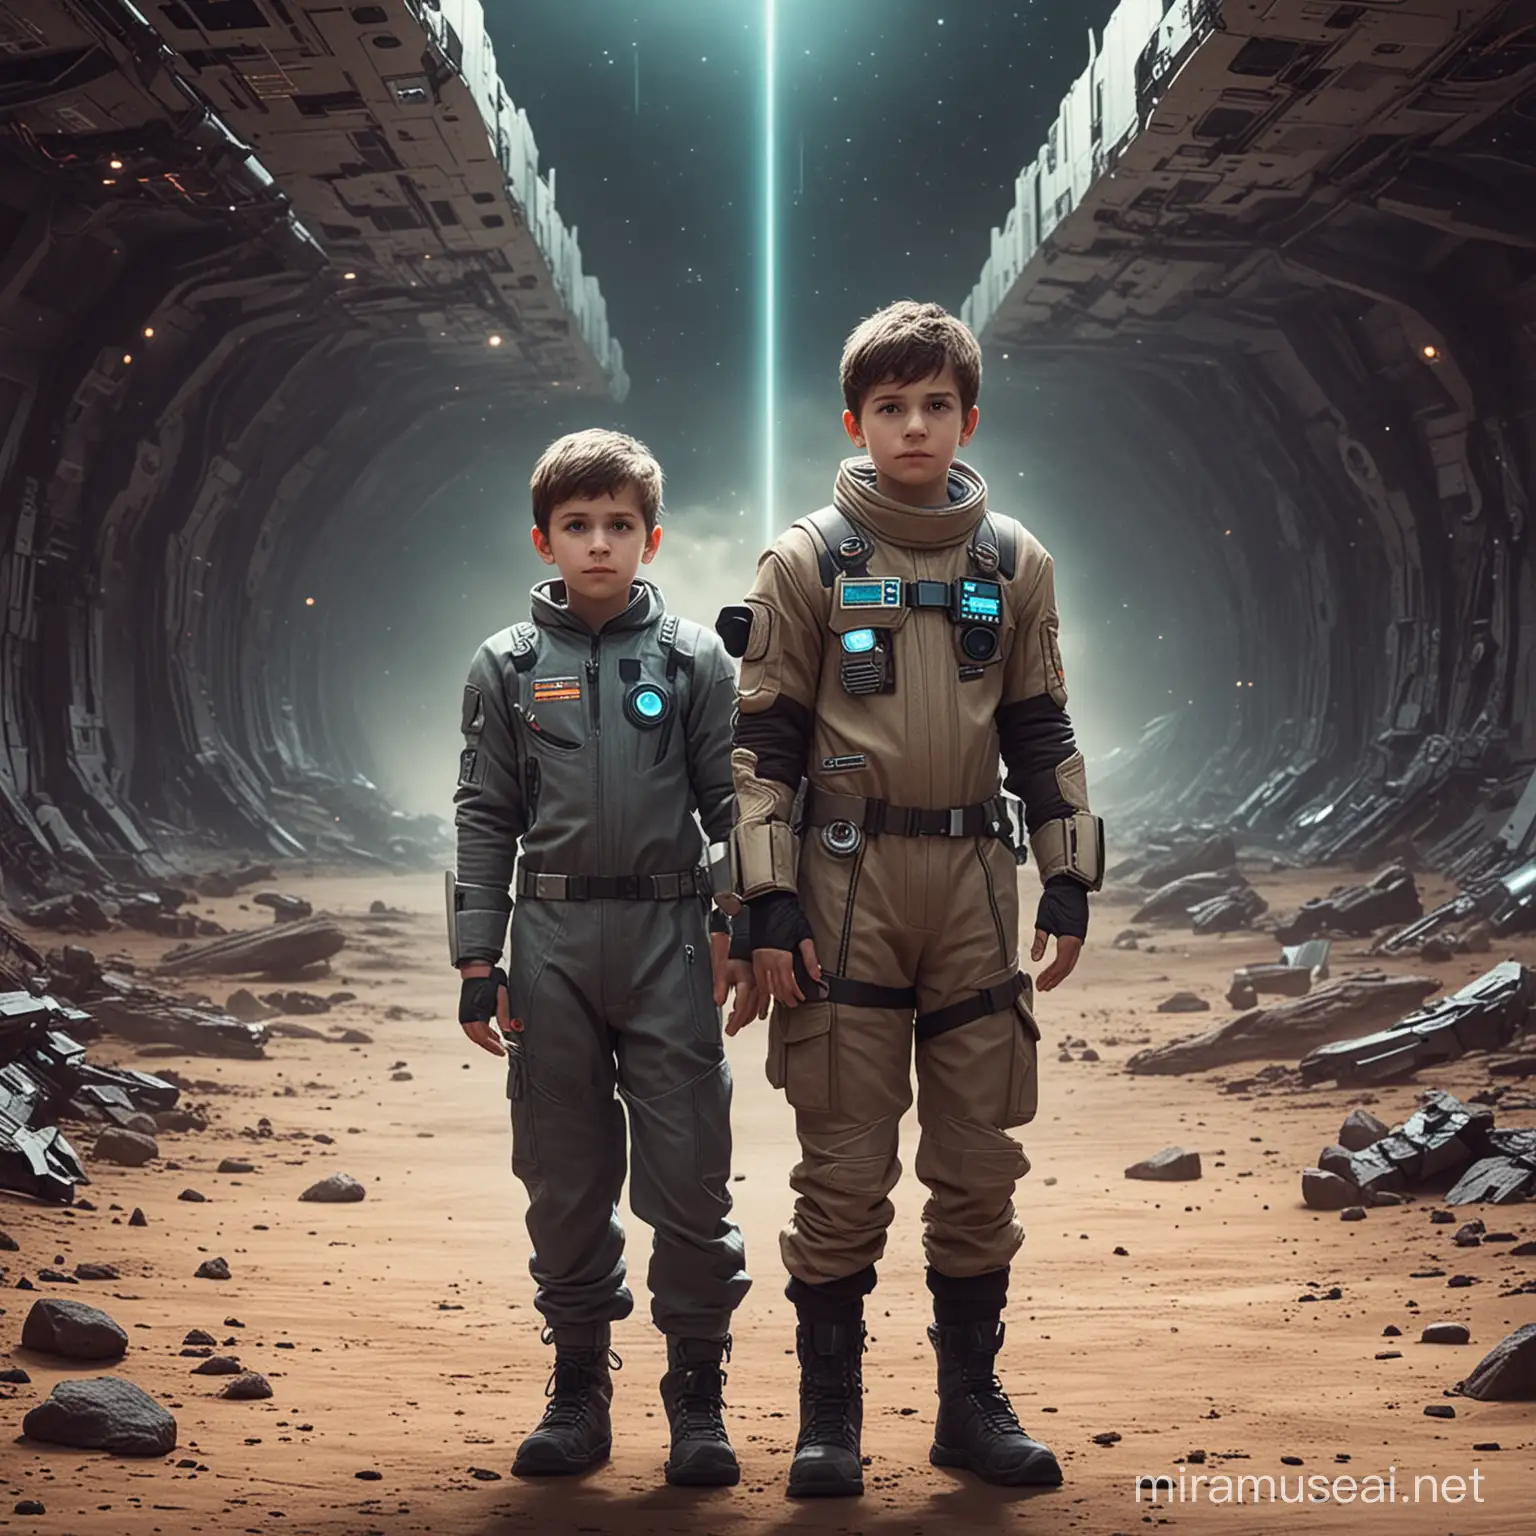 Young Boys Exploring Futuristic Space Station